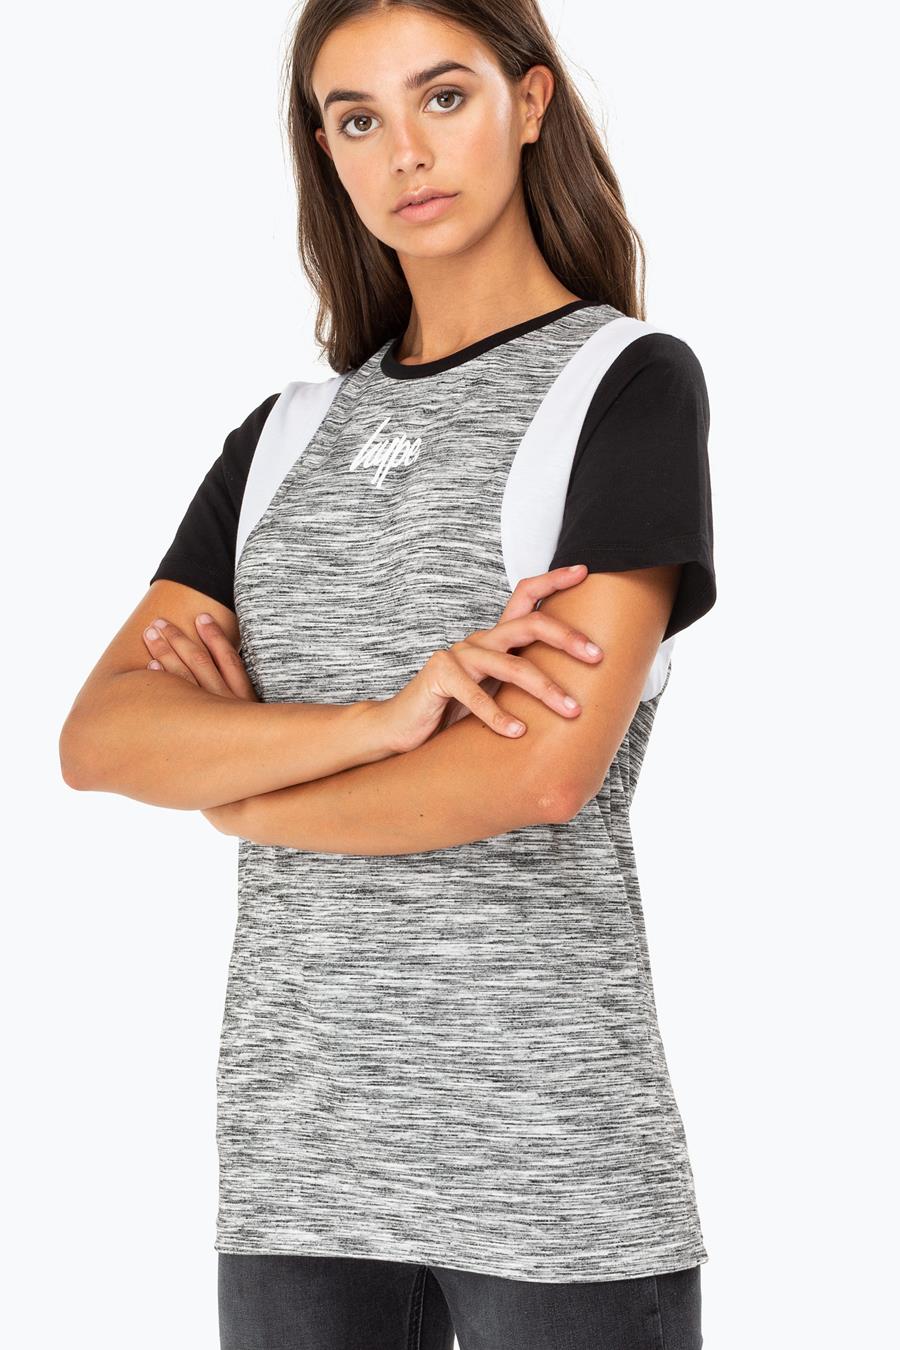 HYPE GREY SPACE PANEL WOMENS T-SHIRT